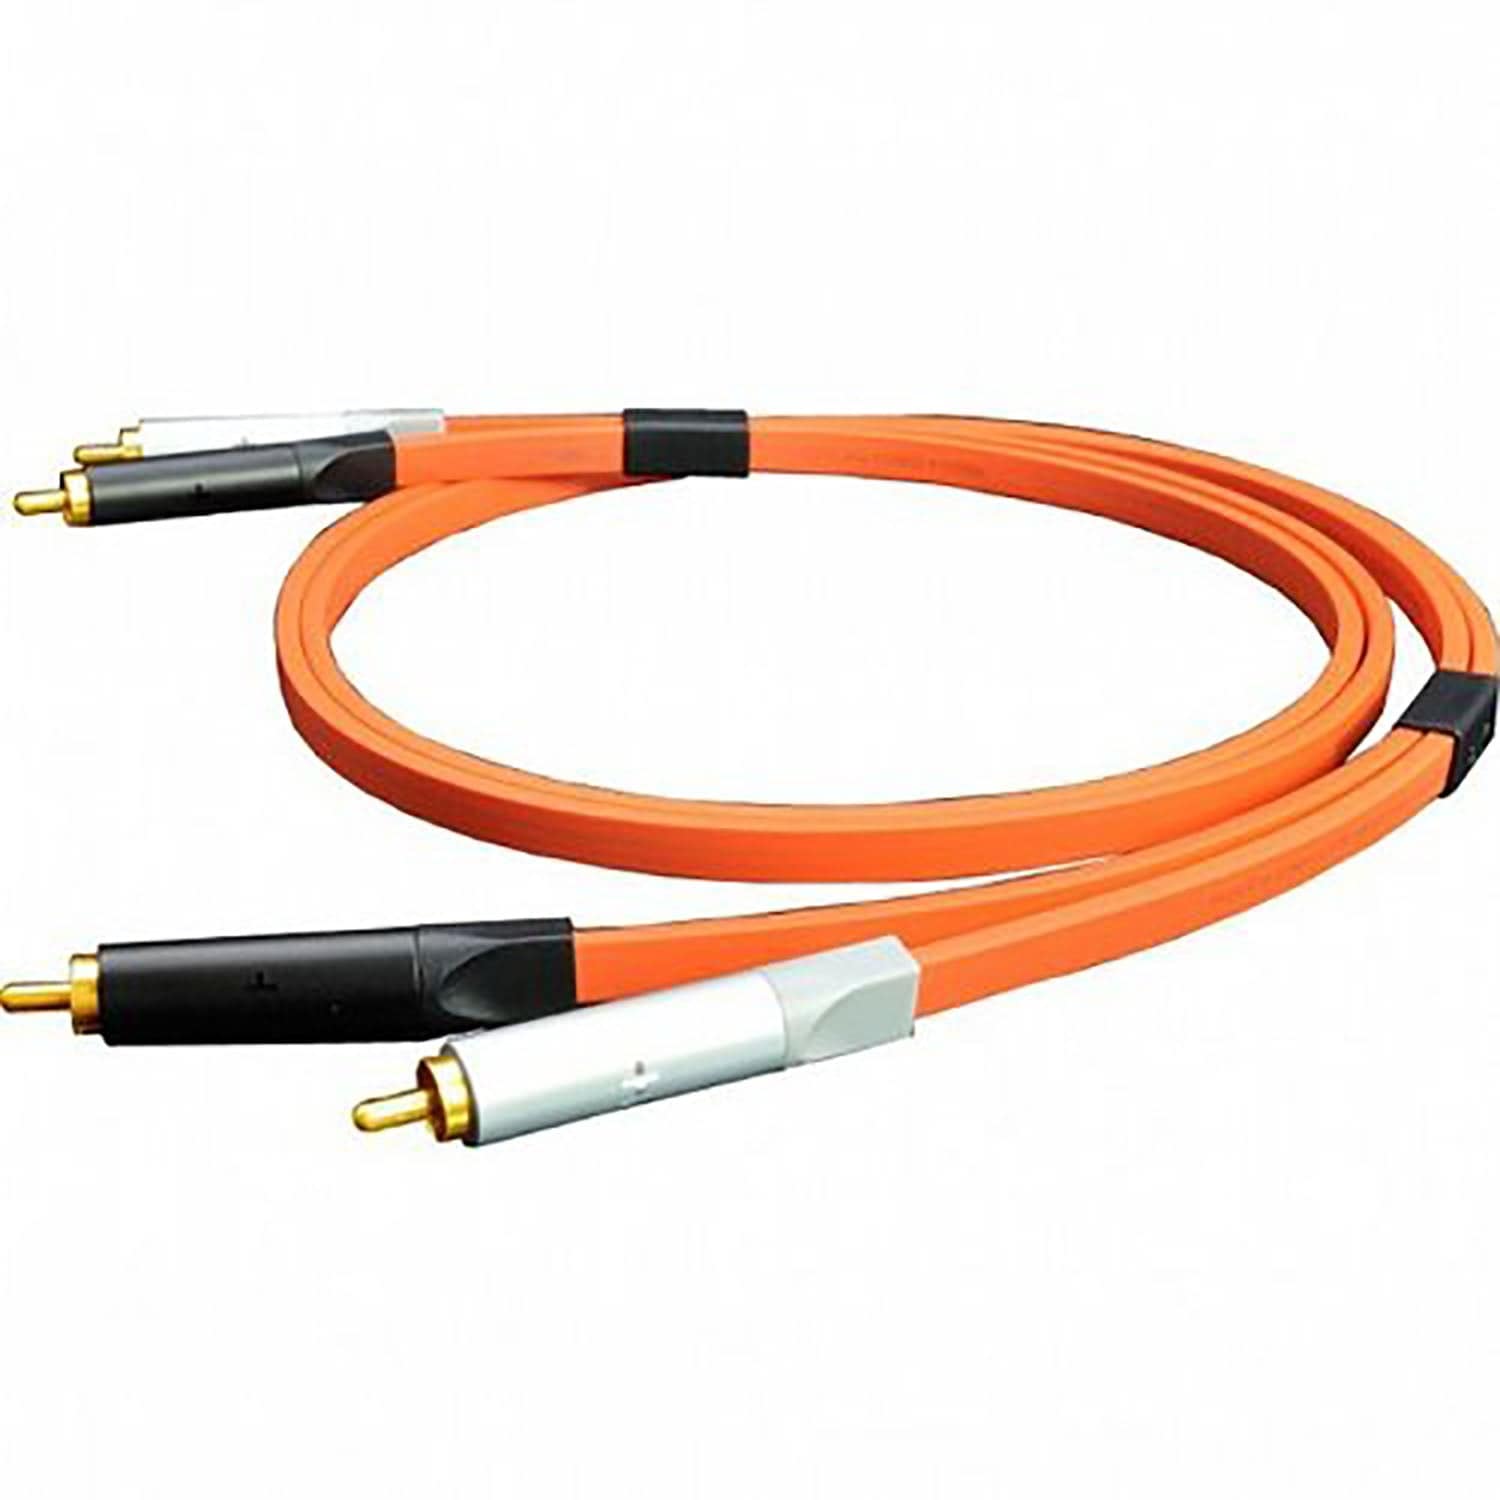 Oyaide Analog Audio RCA DJ Cable NEO d + RCA Class A Connector - 2 Meters Long - Hollywood DJ